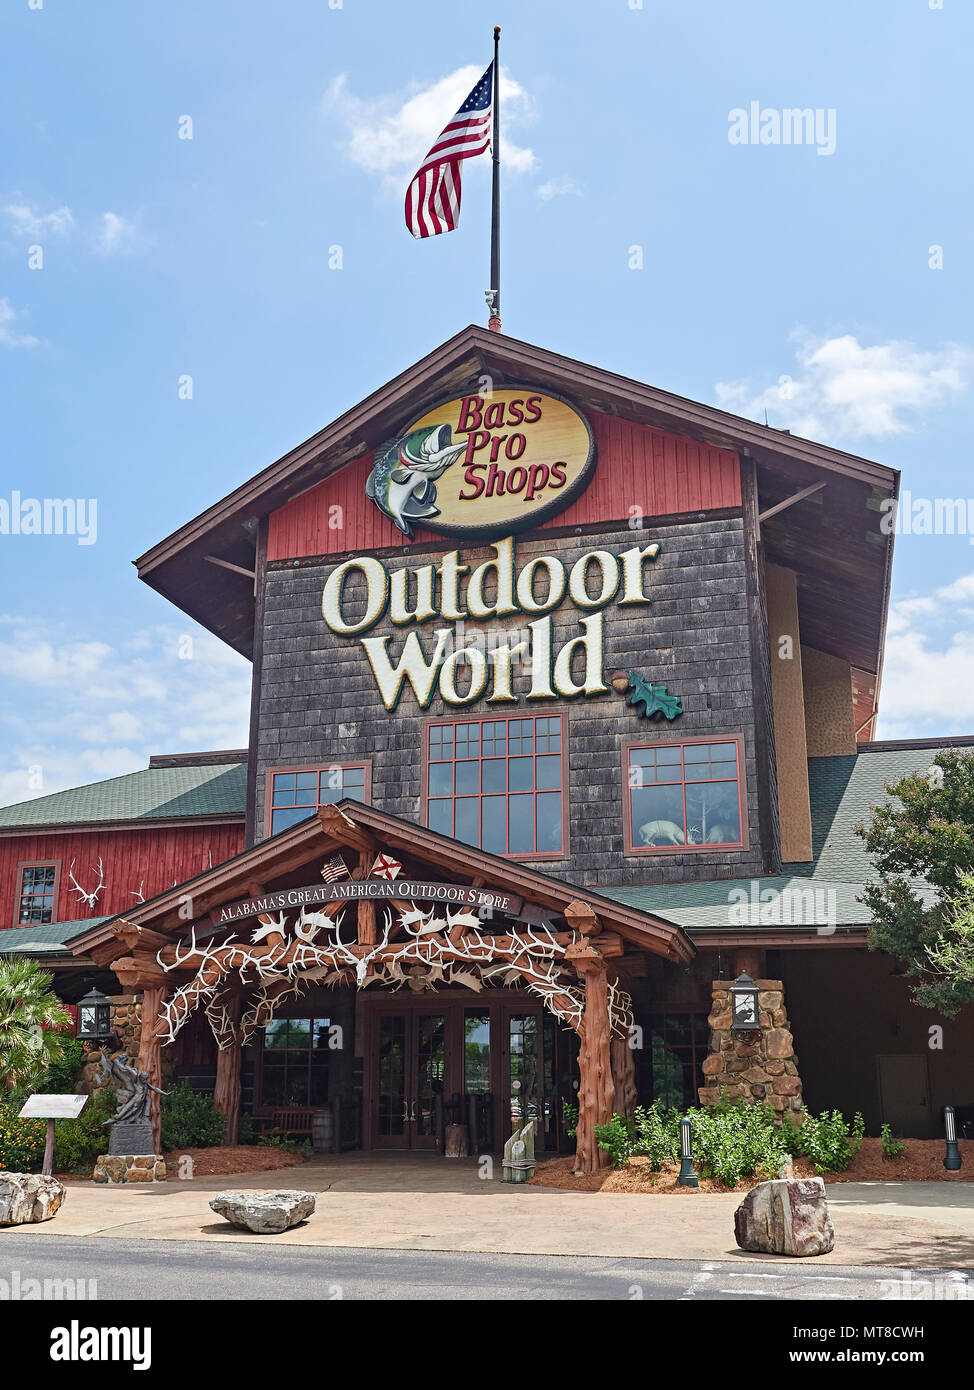 Bass Pro Shops Outdoor World front exterior entrance of the mega